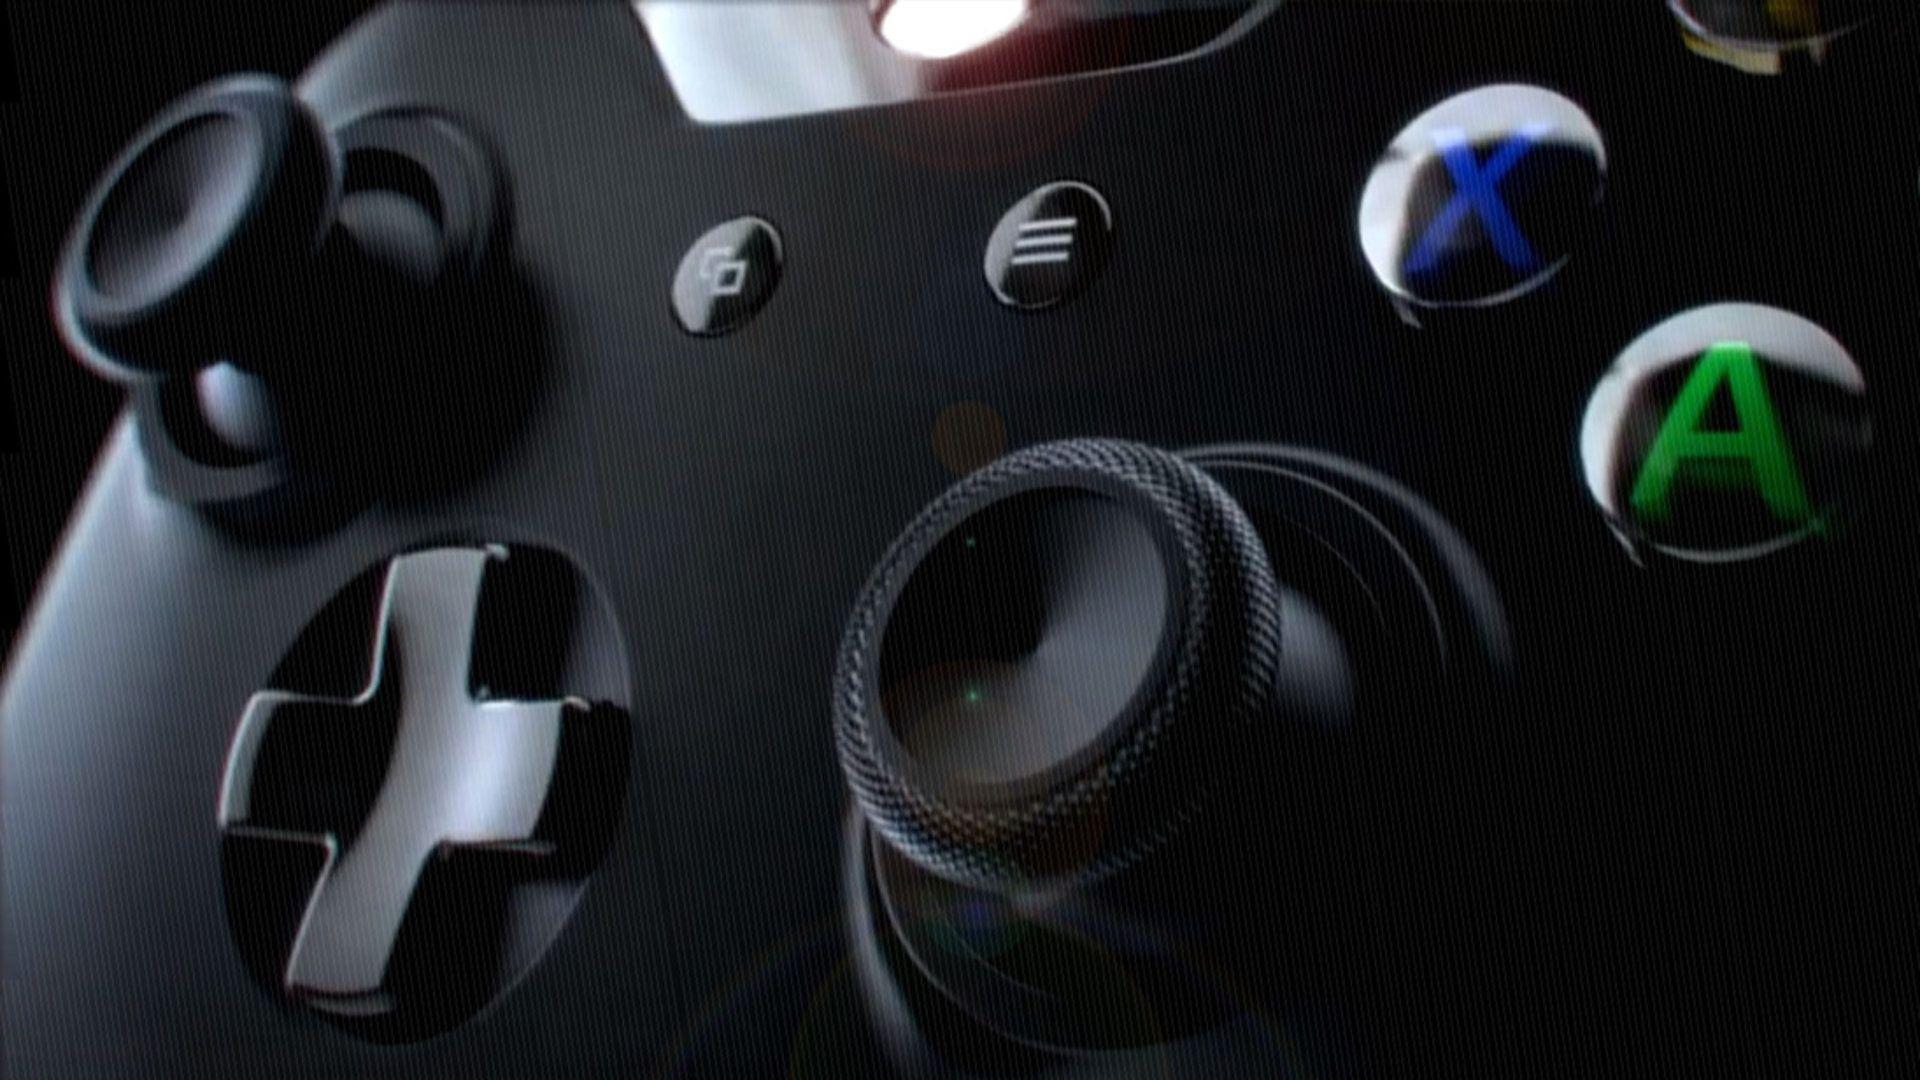 Video Game Controller Wallpaper Free. Amazing Wallpaper. Xbox one